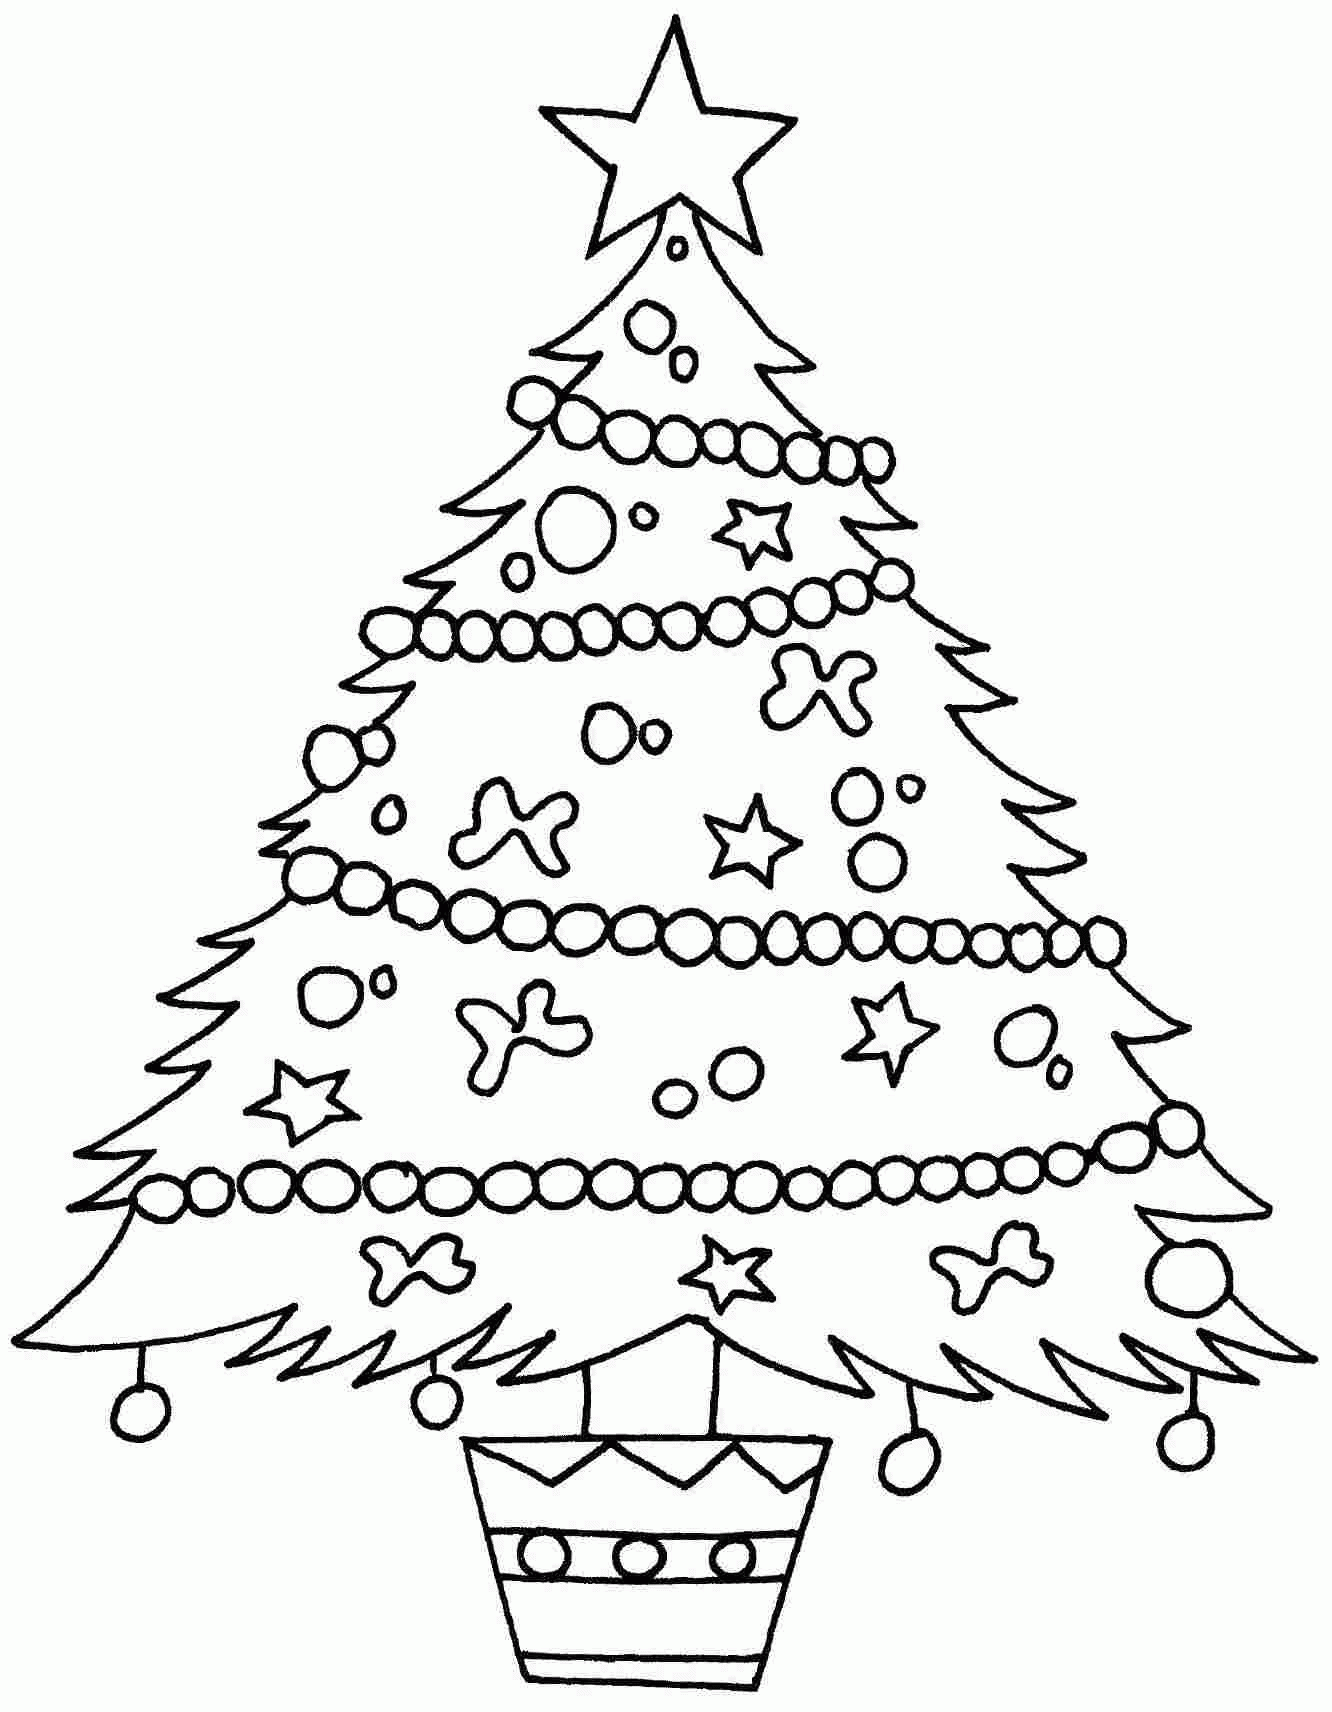 Colouring Pages Of Christmas Tree - Christmas Decorating ideas